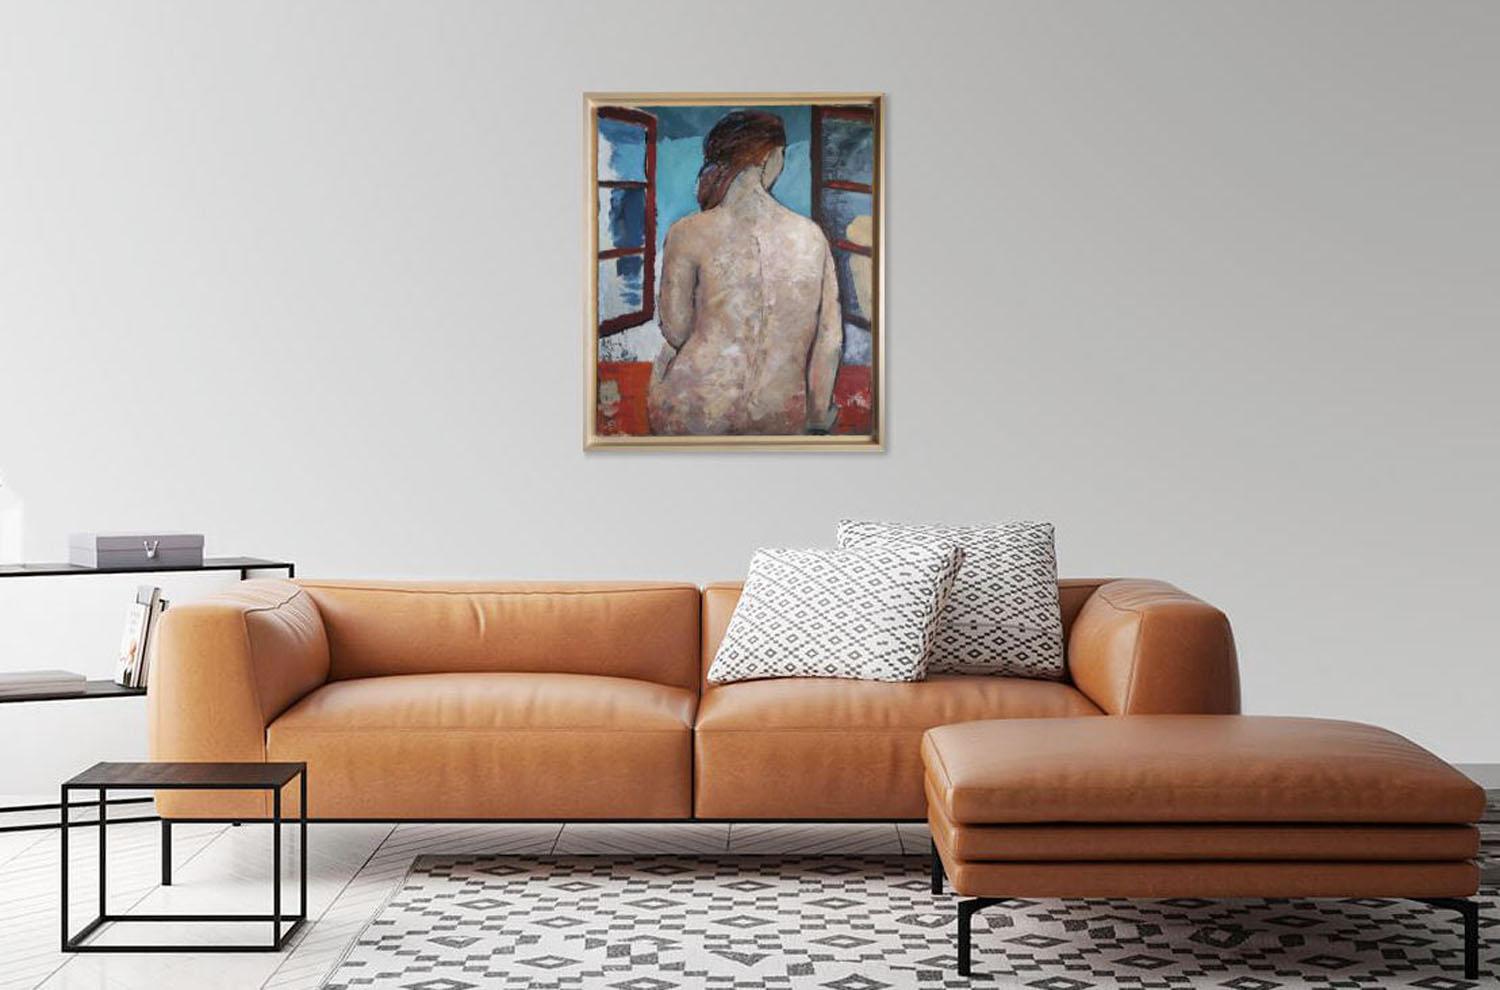 secrets thoughts, nude woman, figurative modern, oil on canvas, textured, France - Painting by SOPHIE DUMONT